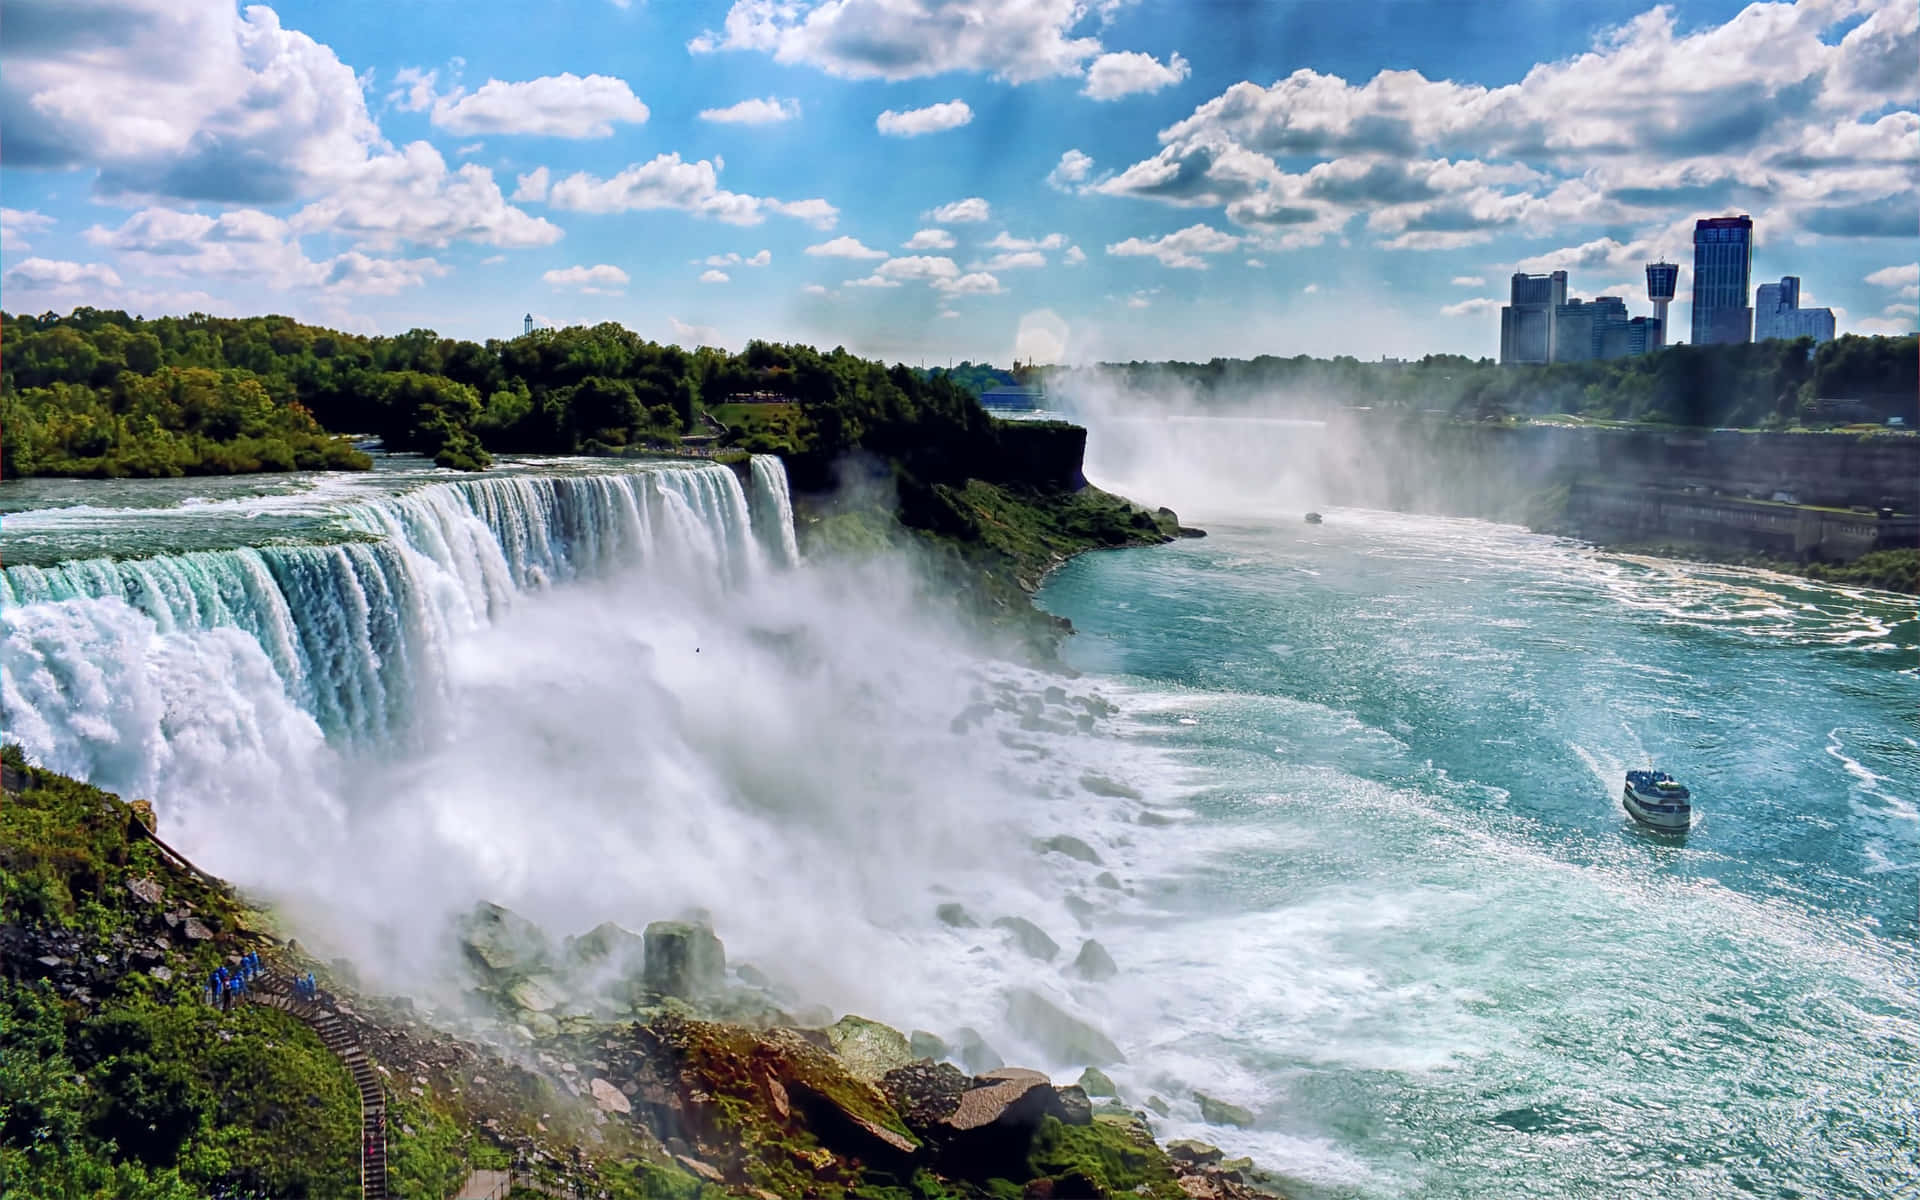 Impeccable view of Niagara Falls from the Canadian side